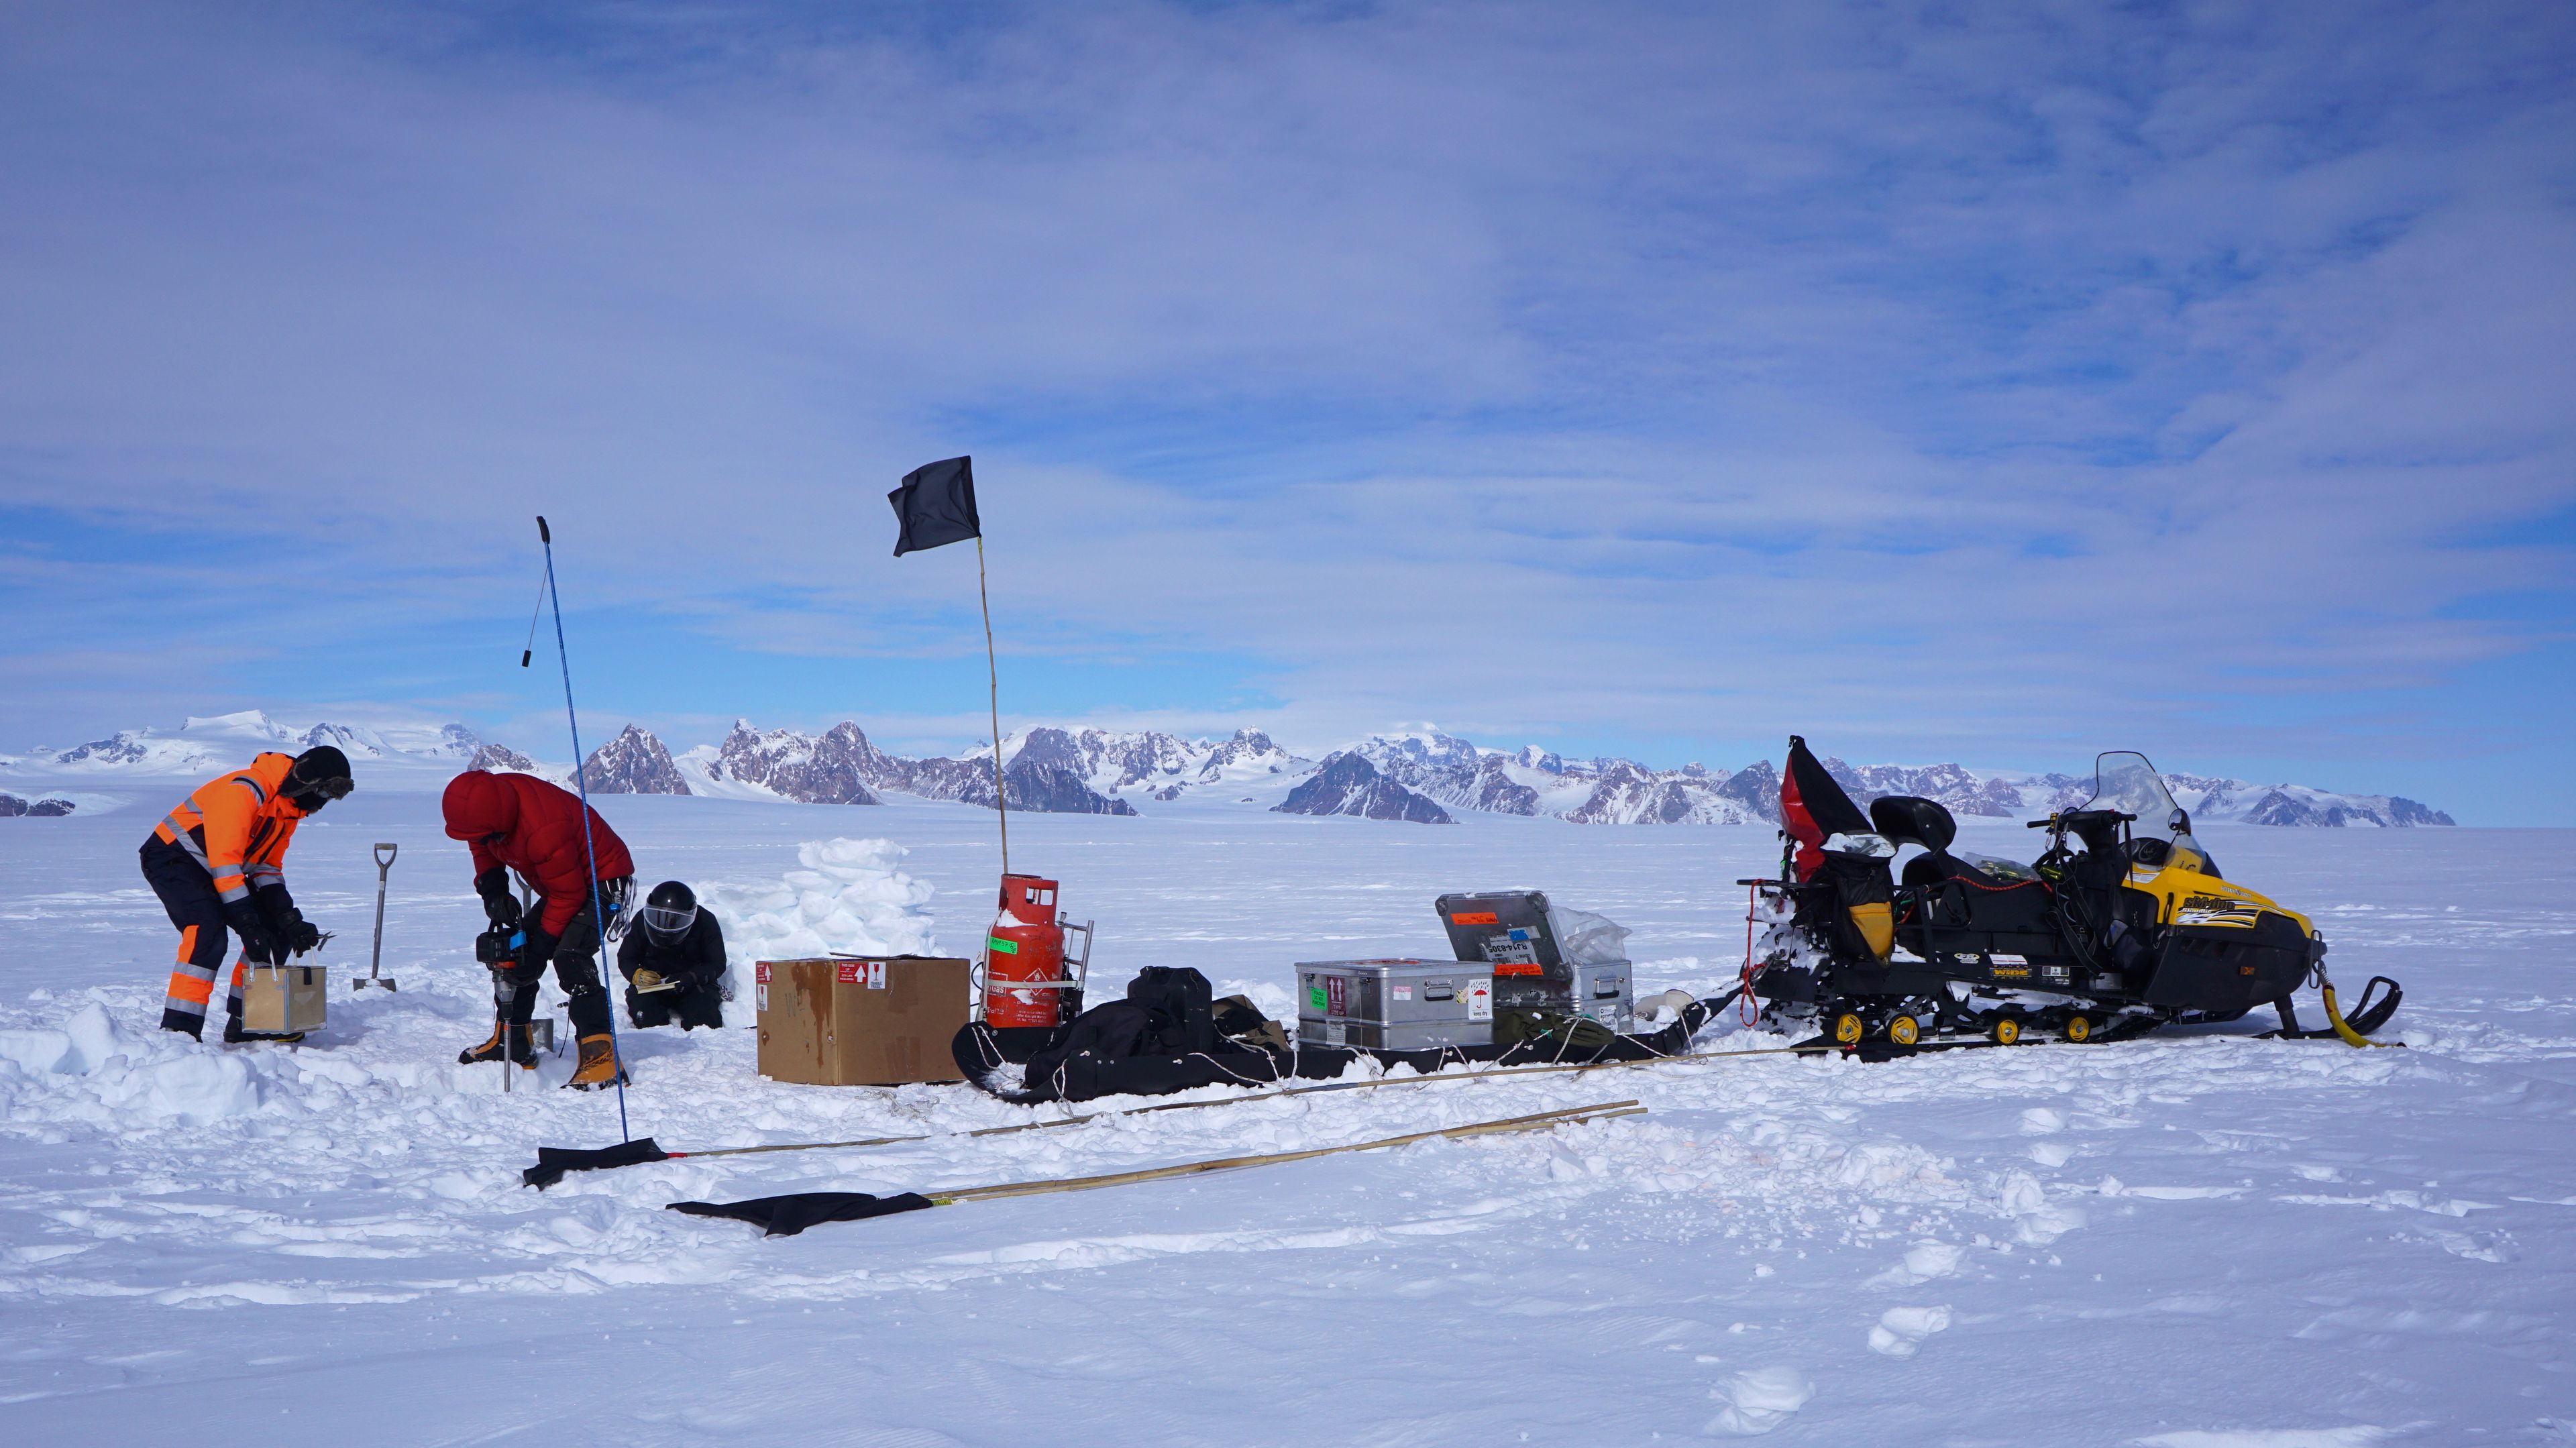 Three scientists installing instruments in the ice and snow next to their equipment and a snowmobile.